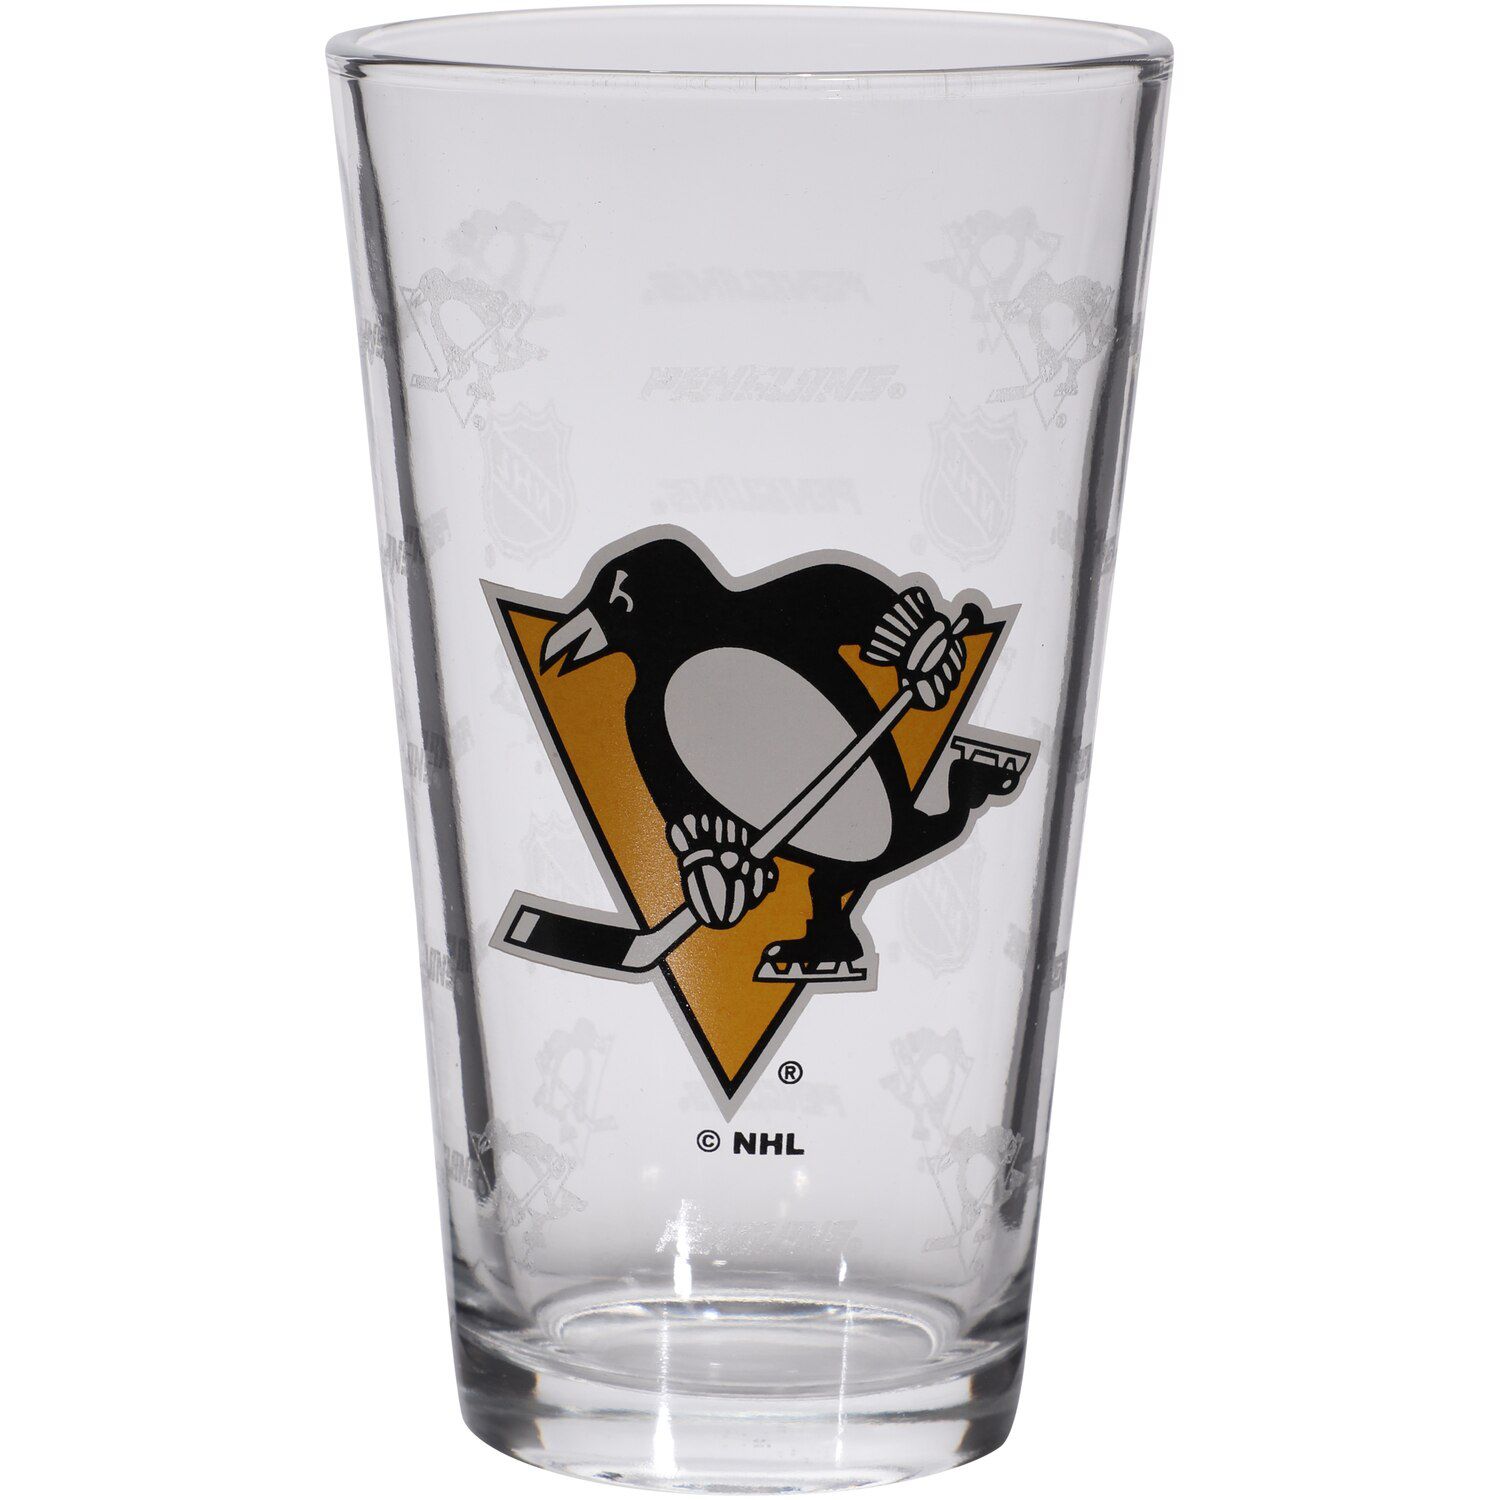 Image for Unbranded Pittsburgh Penguins 16oz. Sandblasted Mixing Glass at Kohl's.